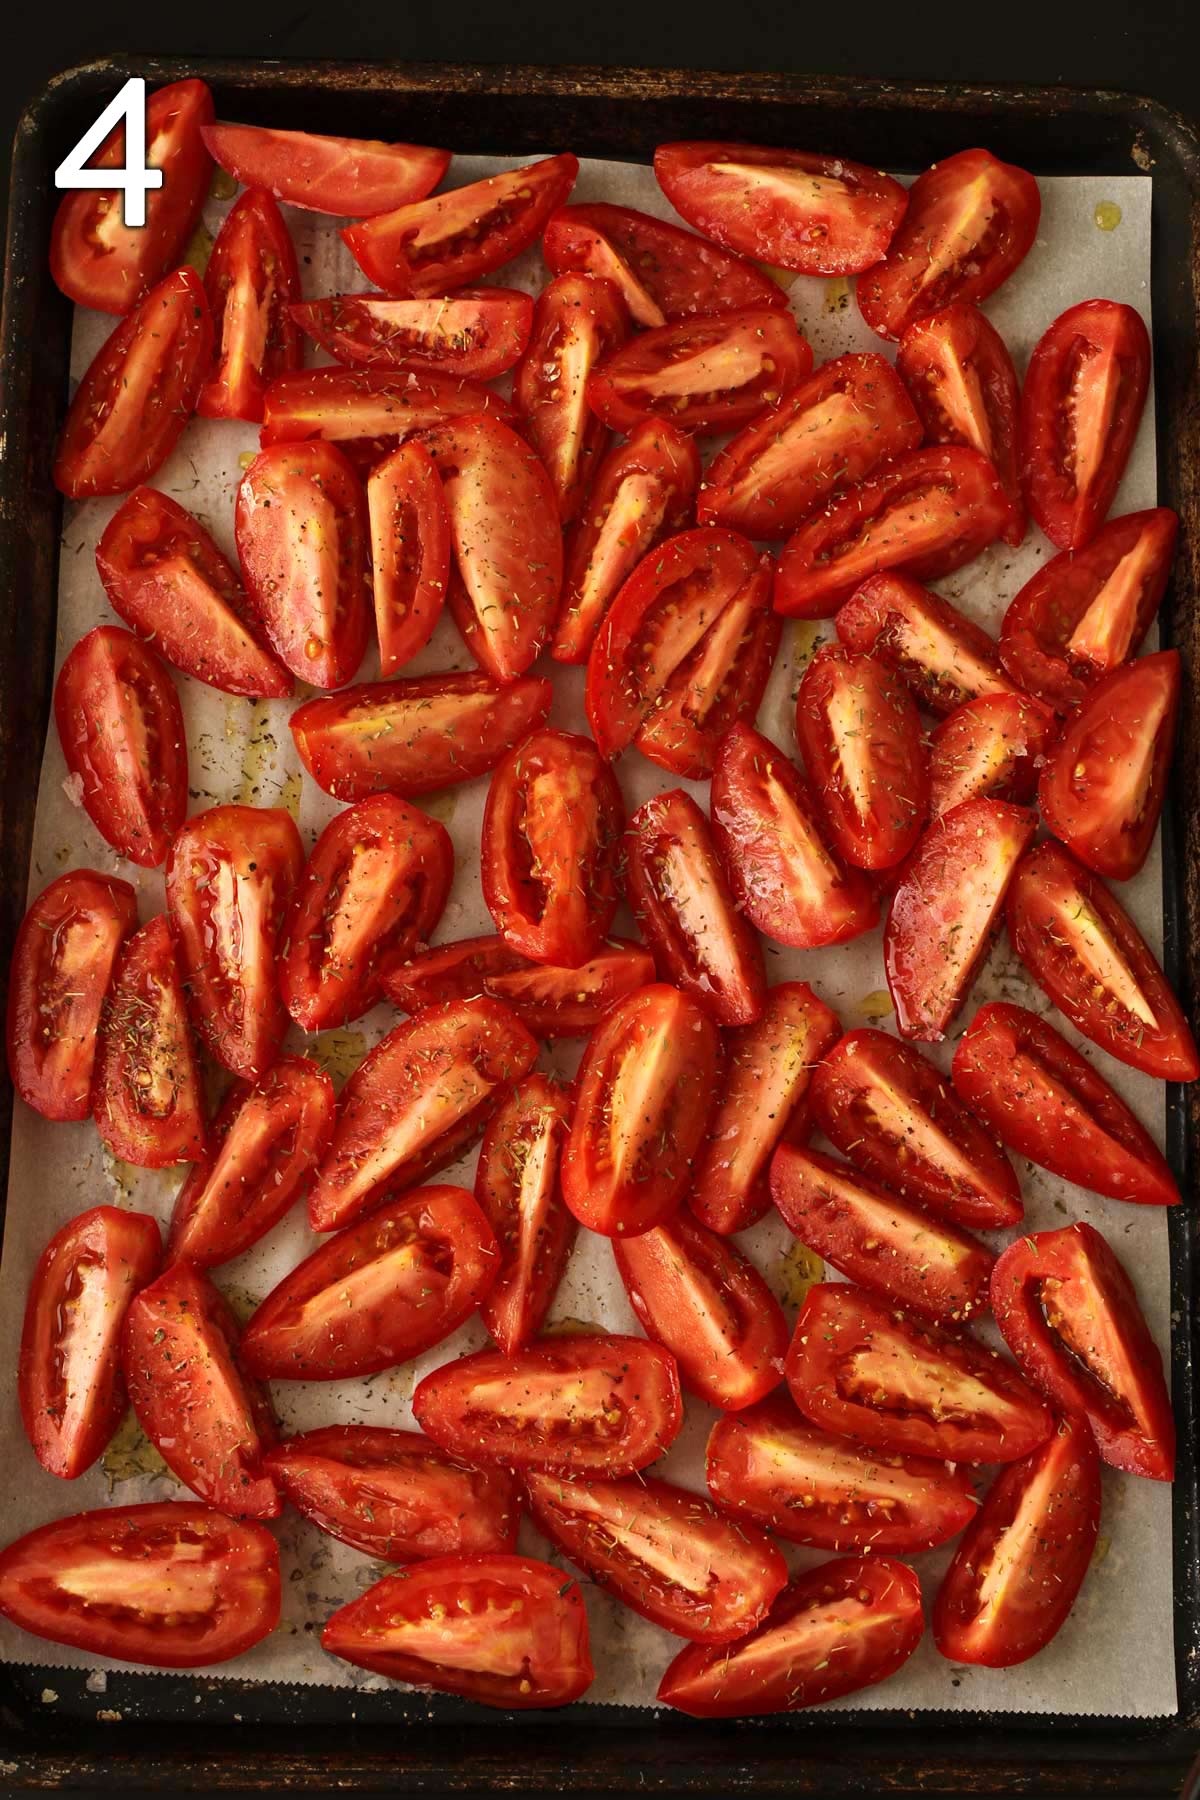 the tomatoes seasoned and ready for roasting.